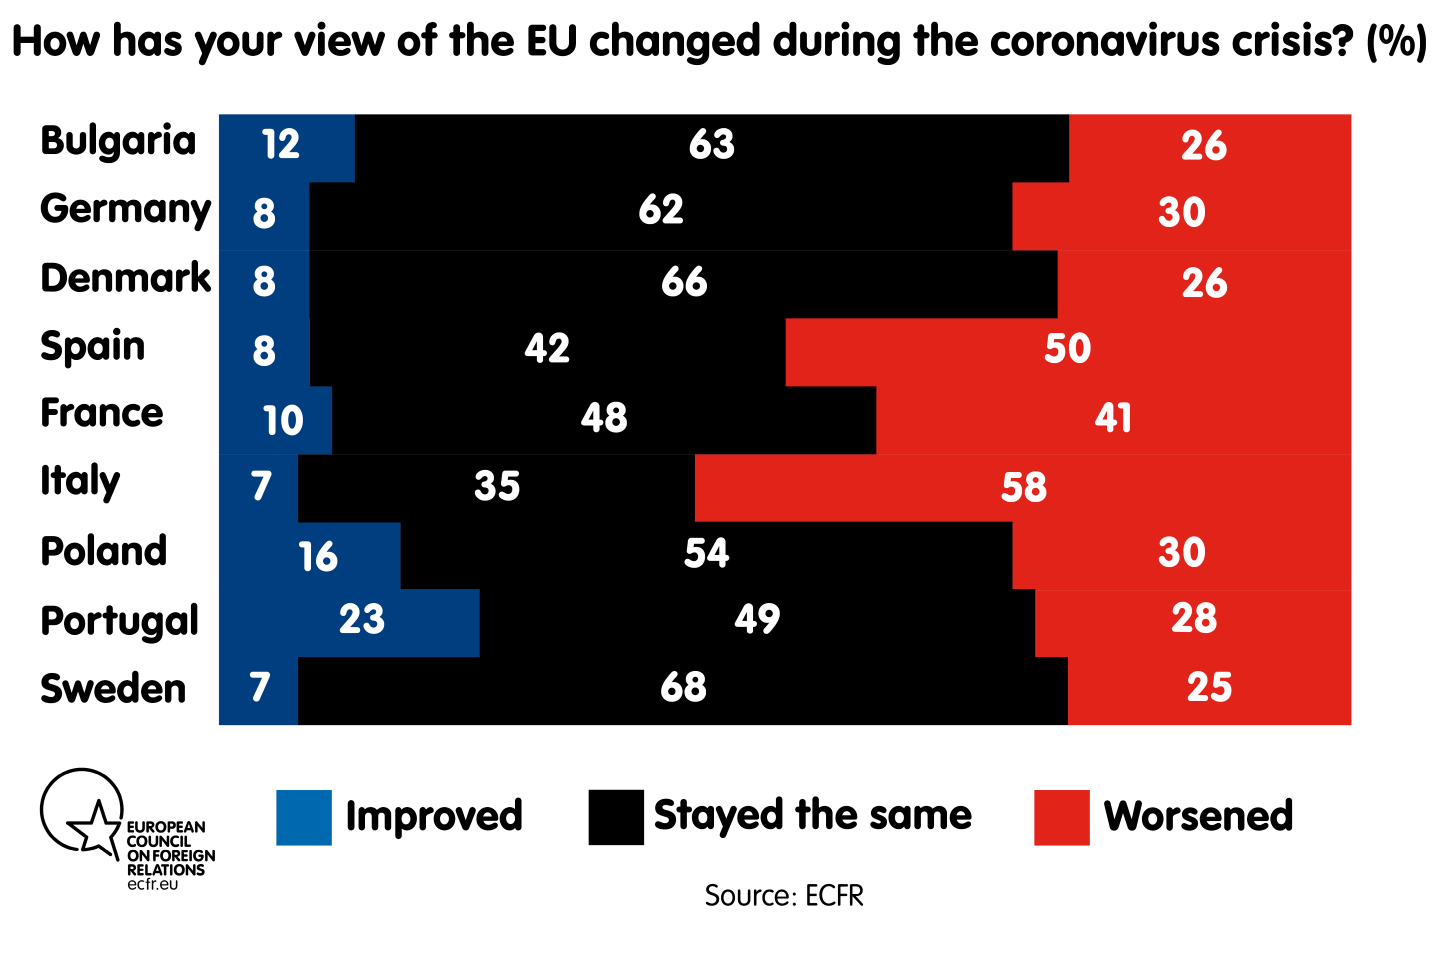 How has your view of the EU changed during the coronavirus crisis?